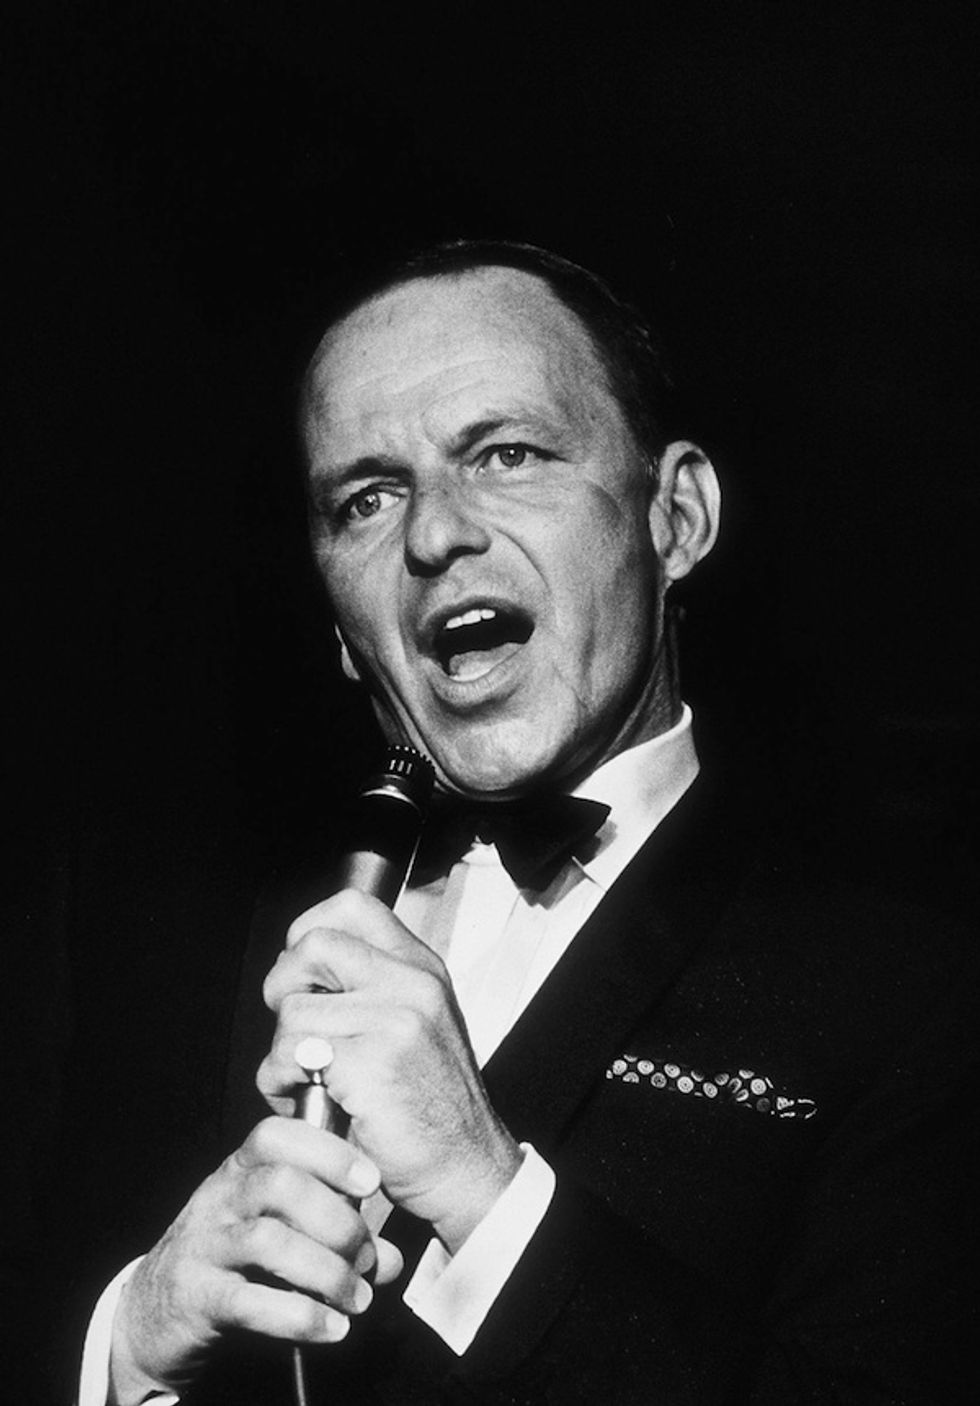 Frank Sinatra to Be Celebrated at Special SF Giants Tribute